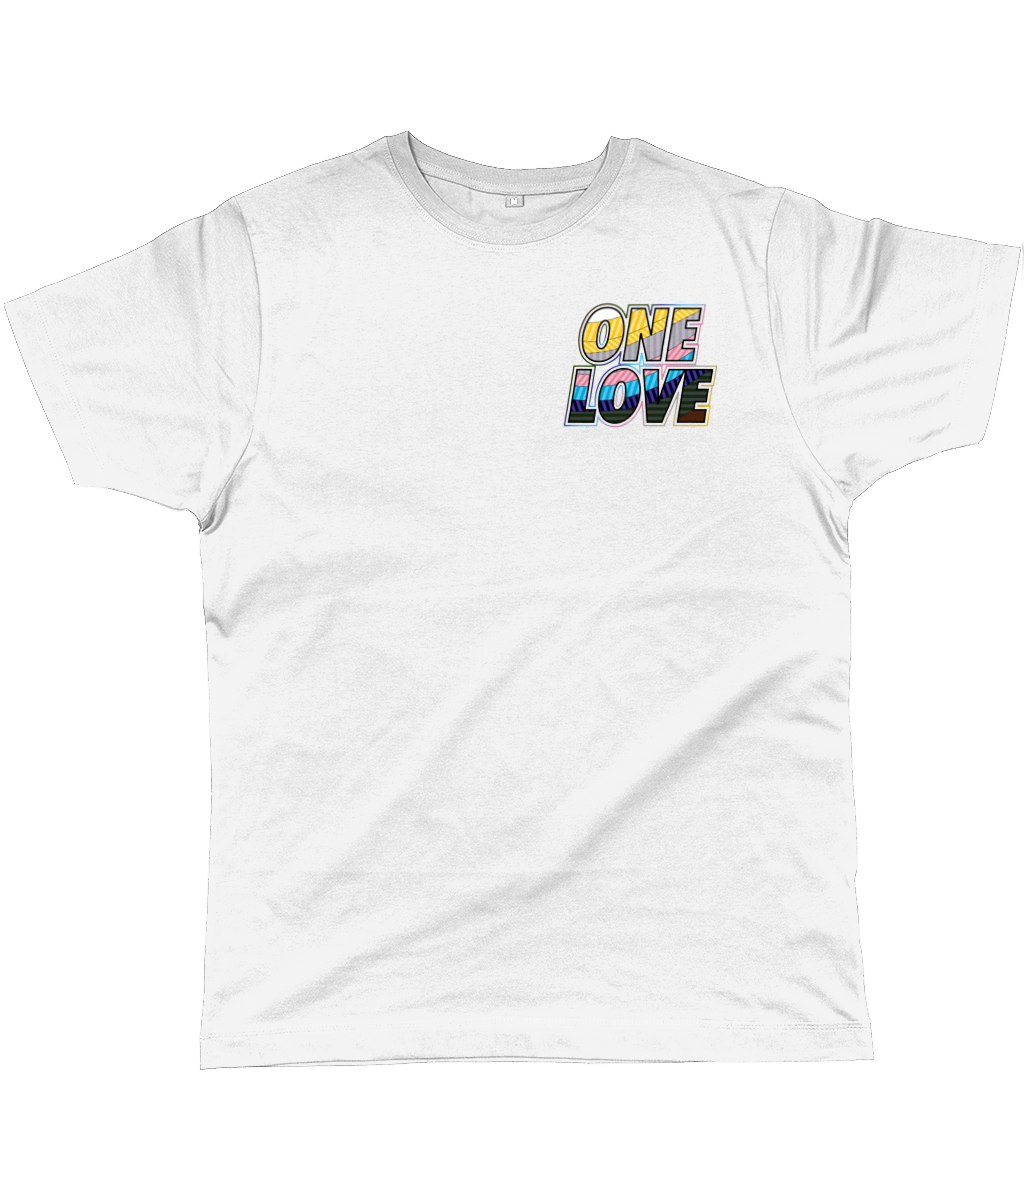 ONE LOVE Sean Wotherspoon - T-Shirt 